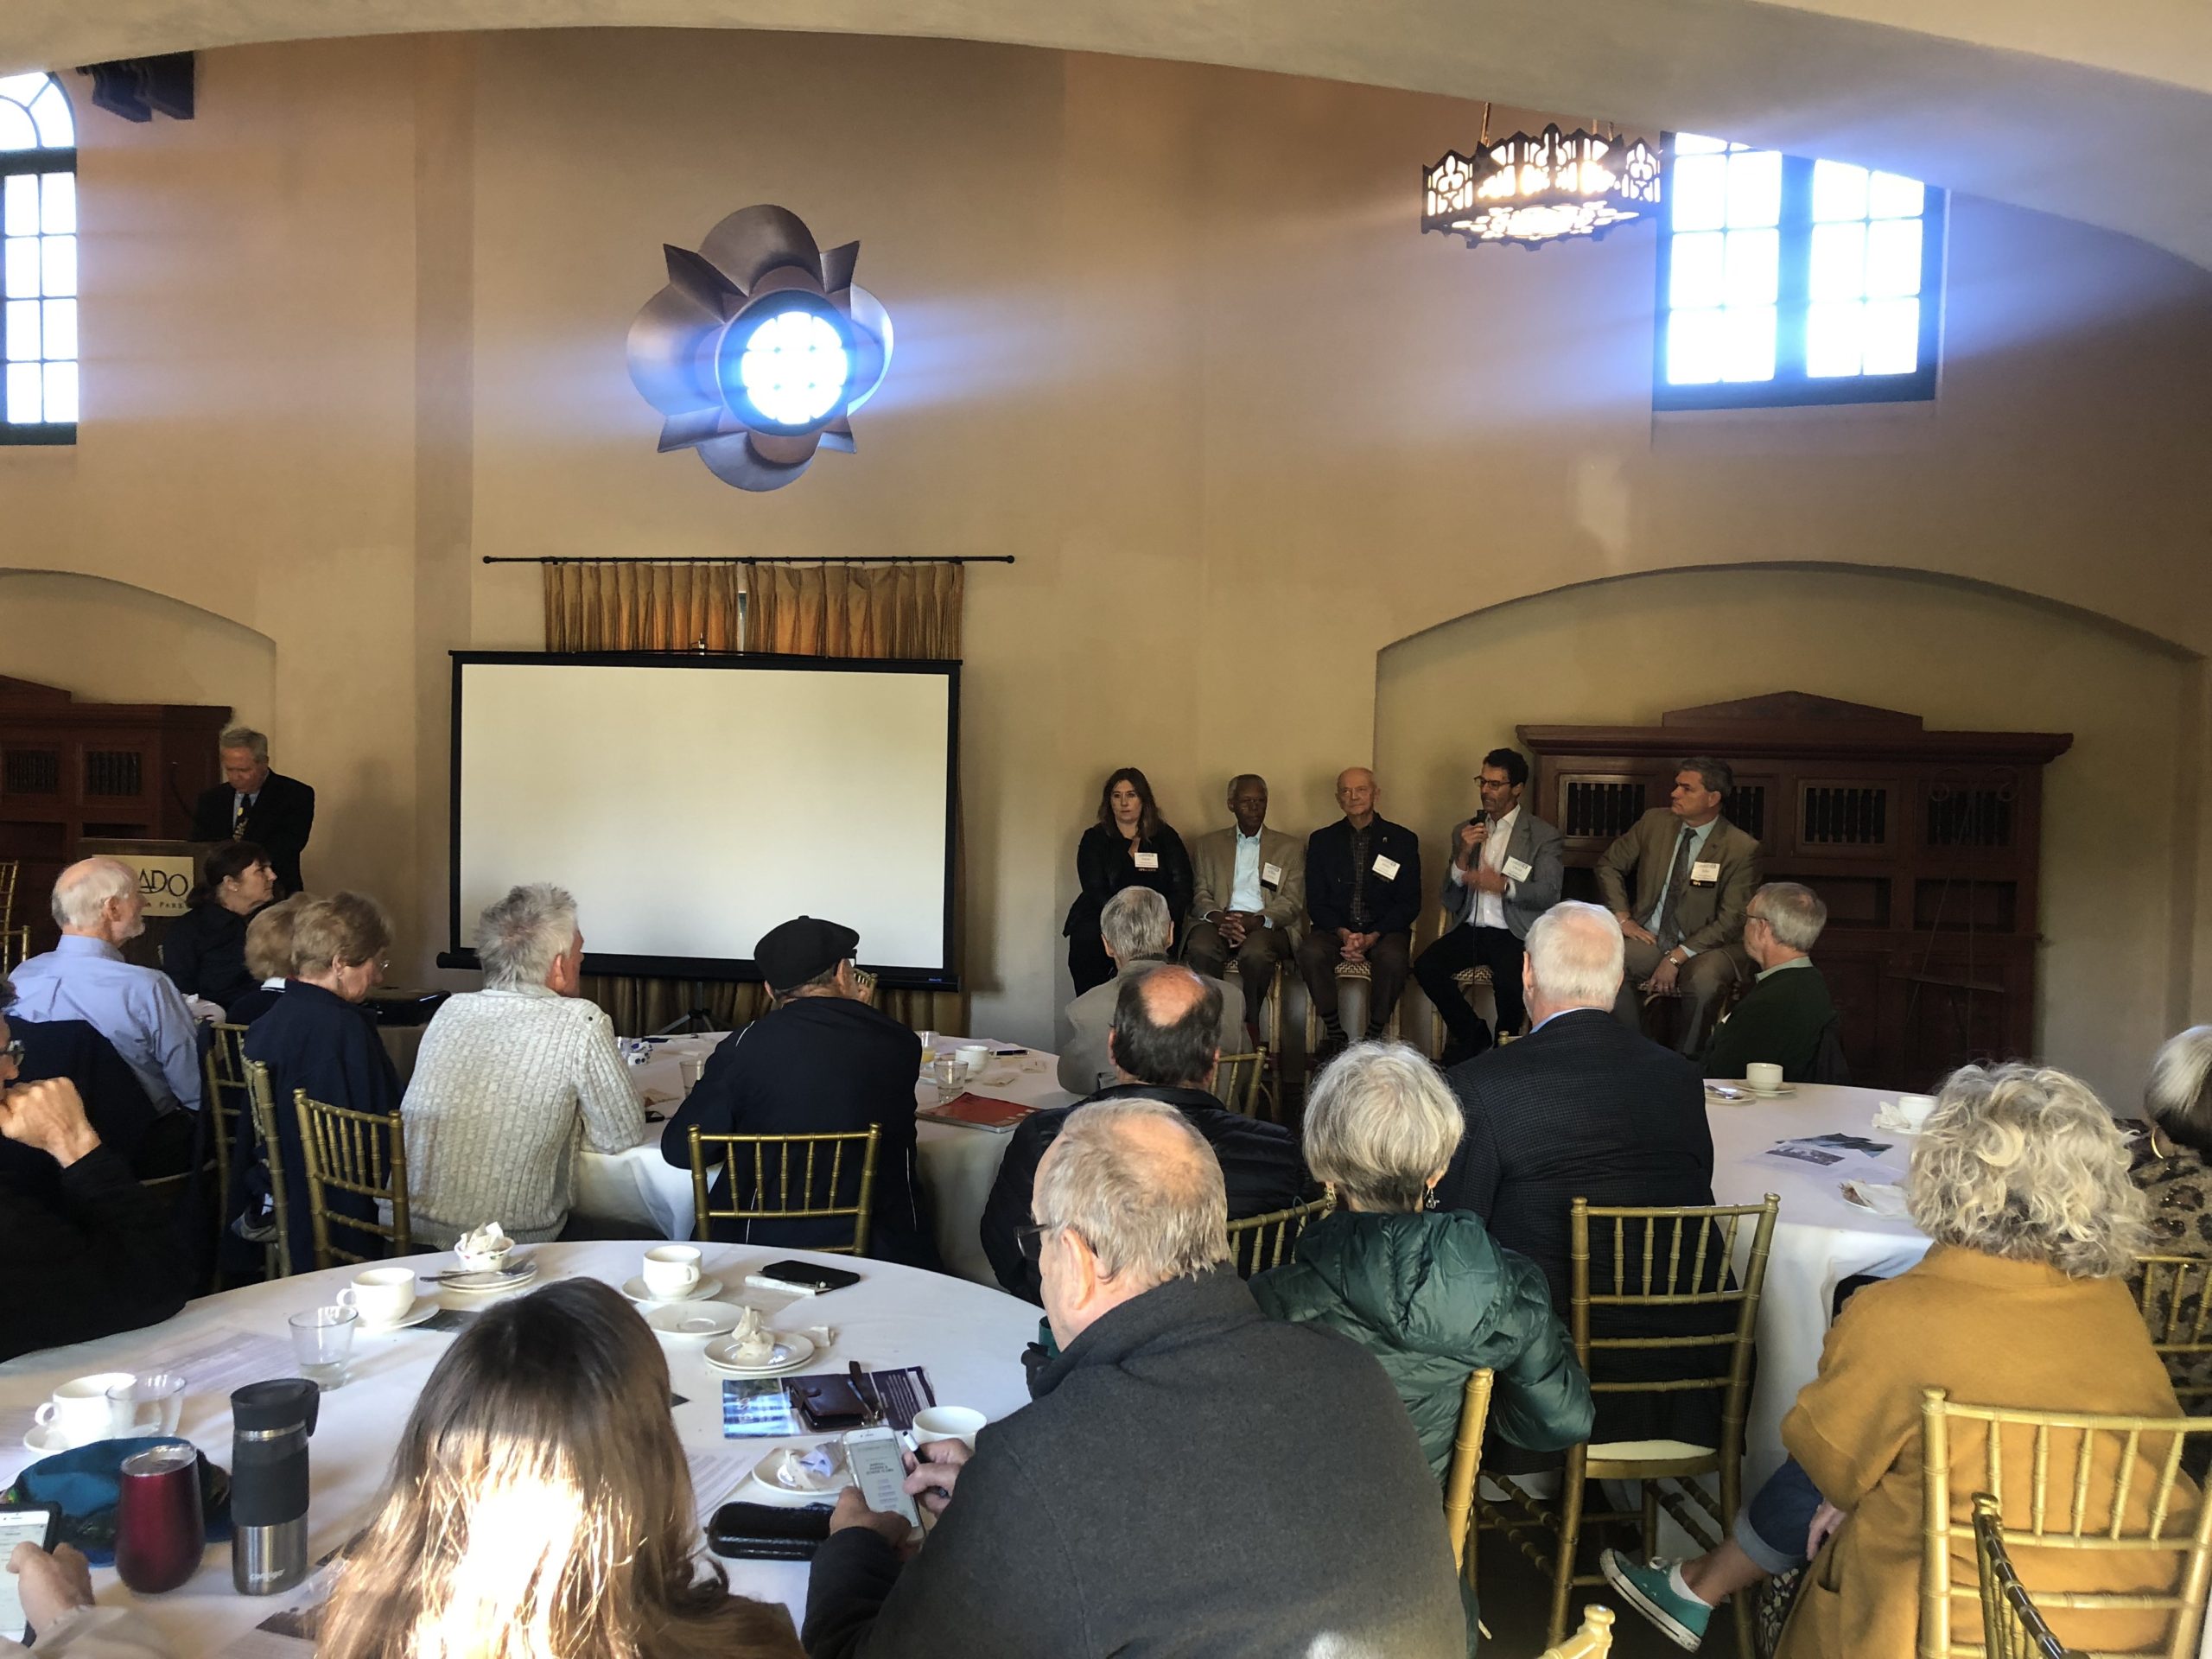 stakeholders-discuss-the-future-of-balboa-park-at-c-3-breakfast-event